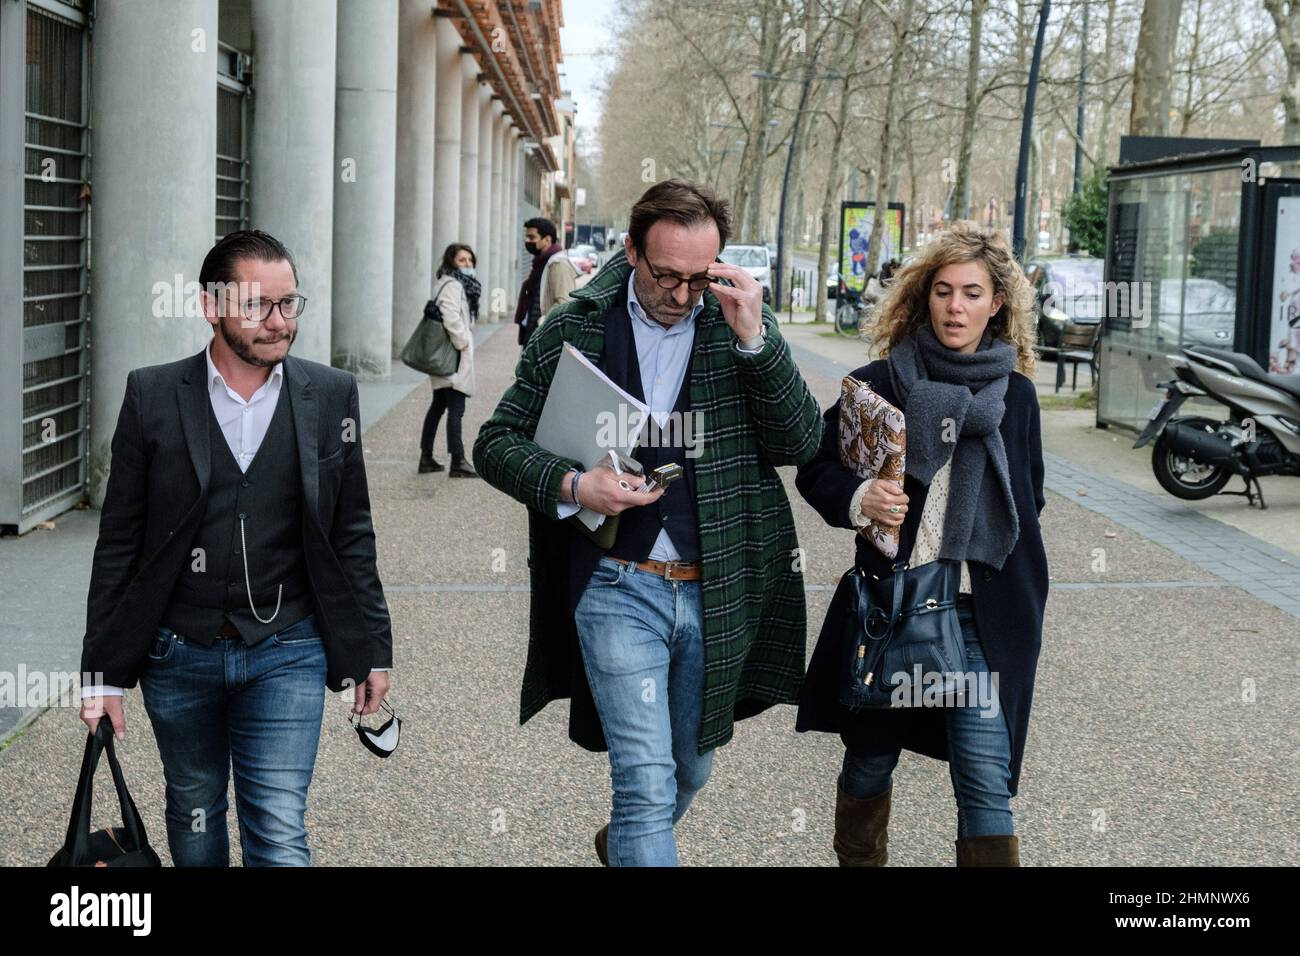 French lawyers for Cedric Jubillar, Alexandre Martin (green coat),  Jean-Baptiste Alary and Emmanuelle Franck leaving Toulouse's courthouse,  southern France on February 11, 2022. The husband of Delphine Jubillar, a  33-year-old nurse who